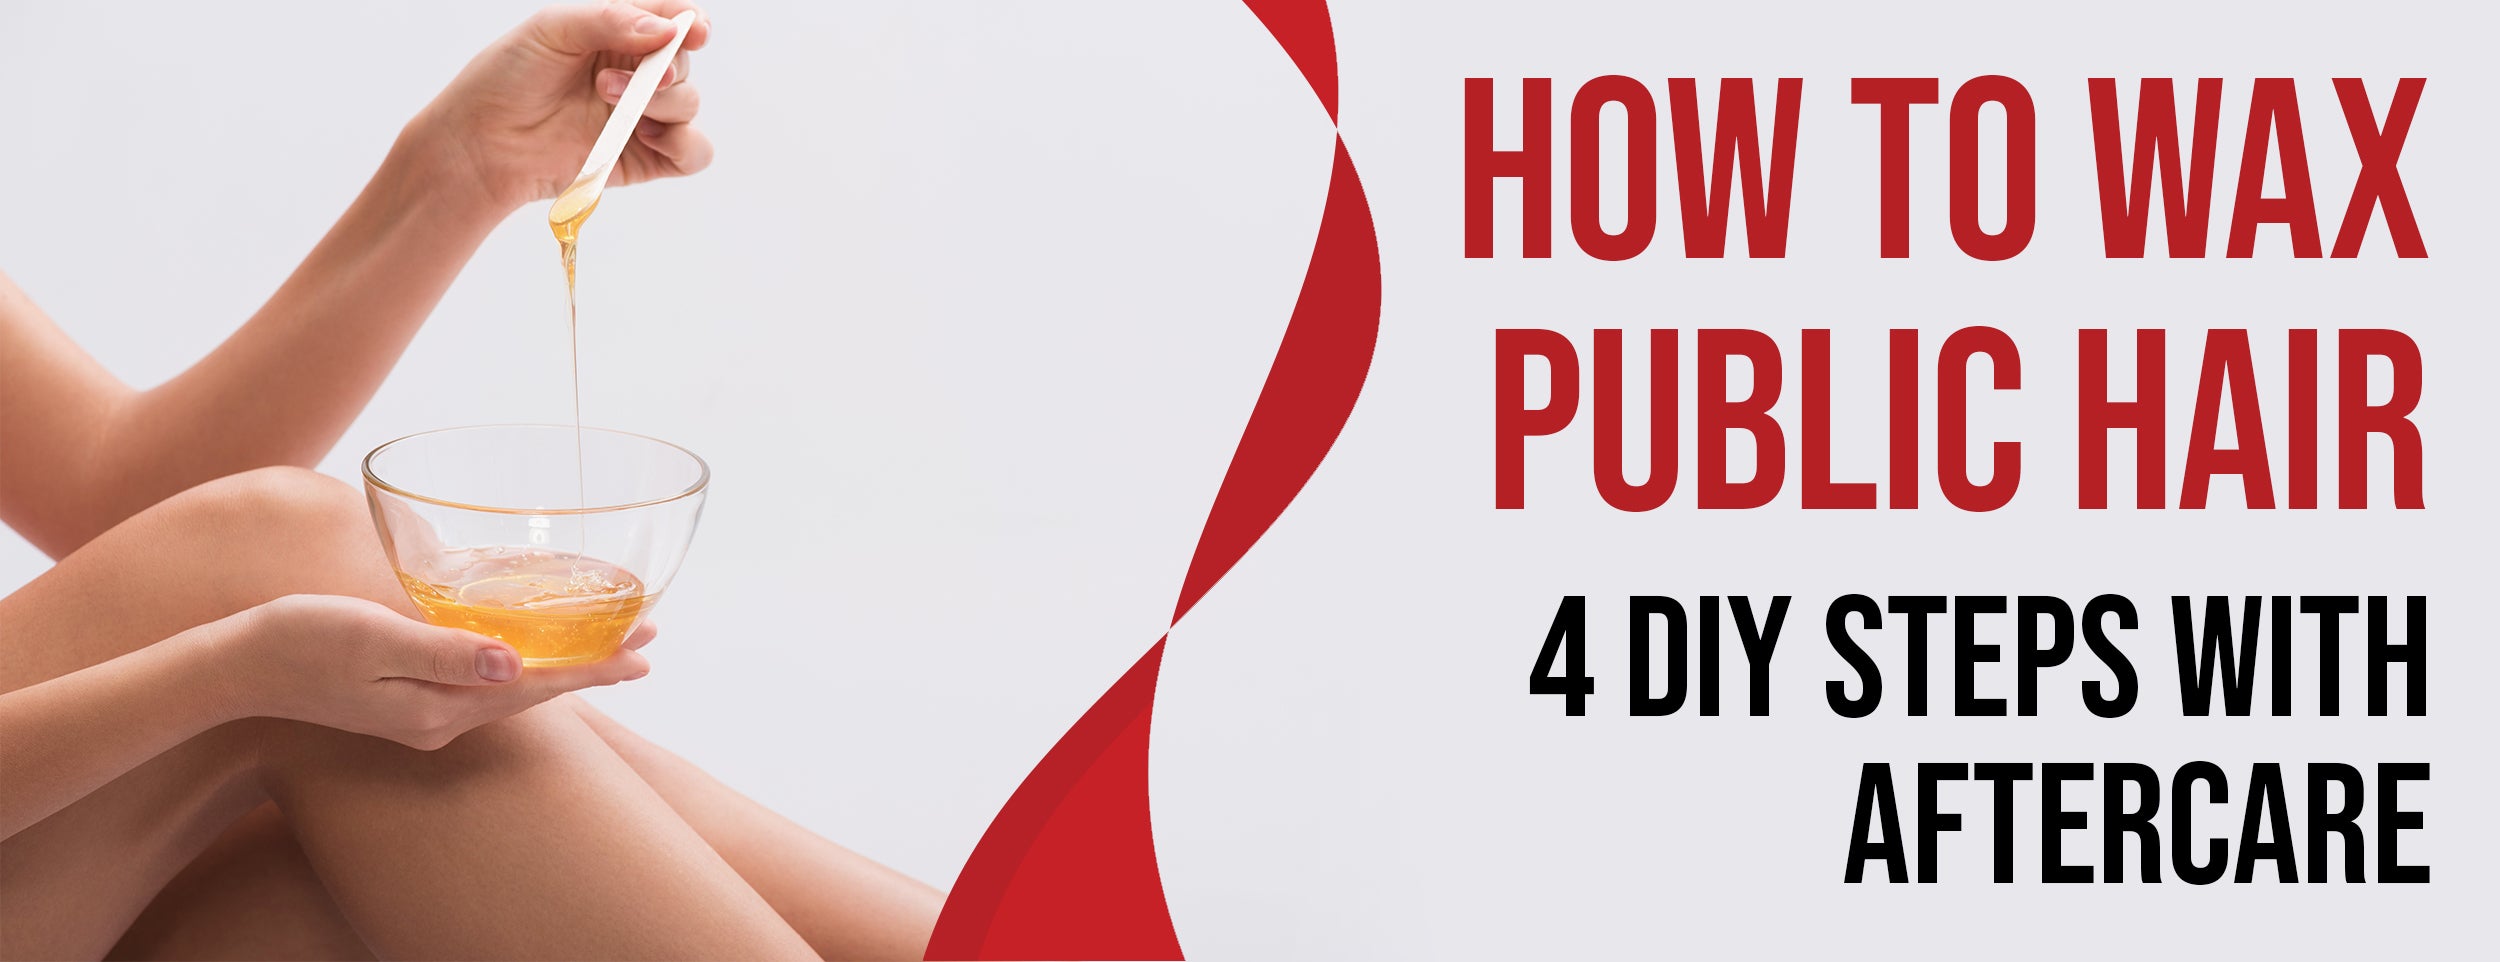 4 Steps & Aftercare for Waxing Public Hair